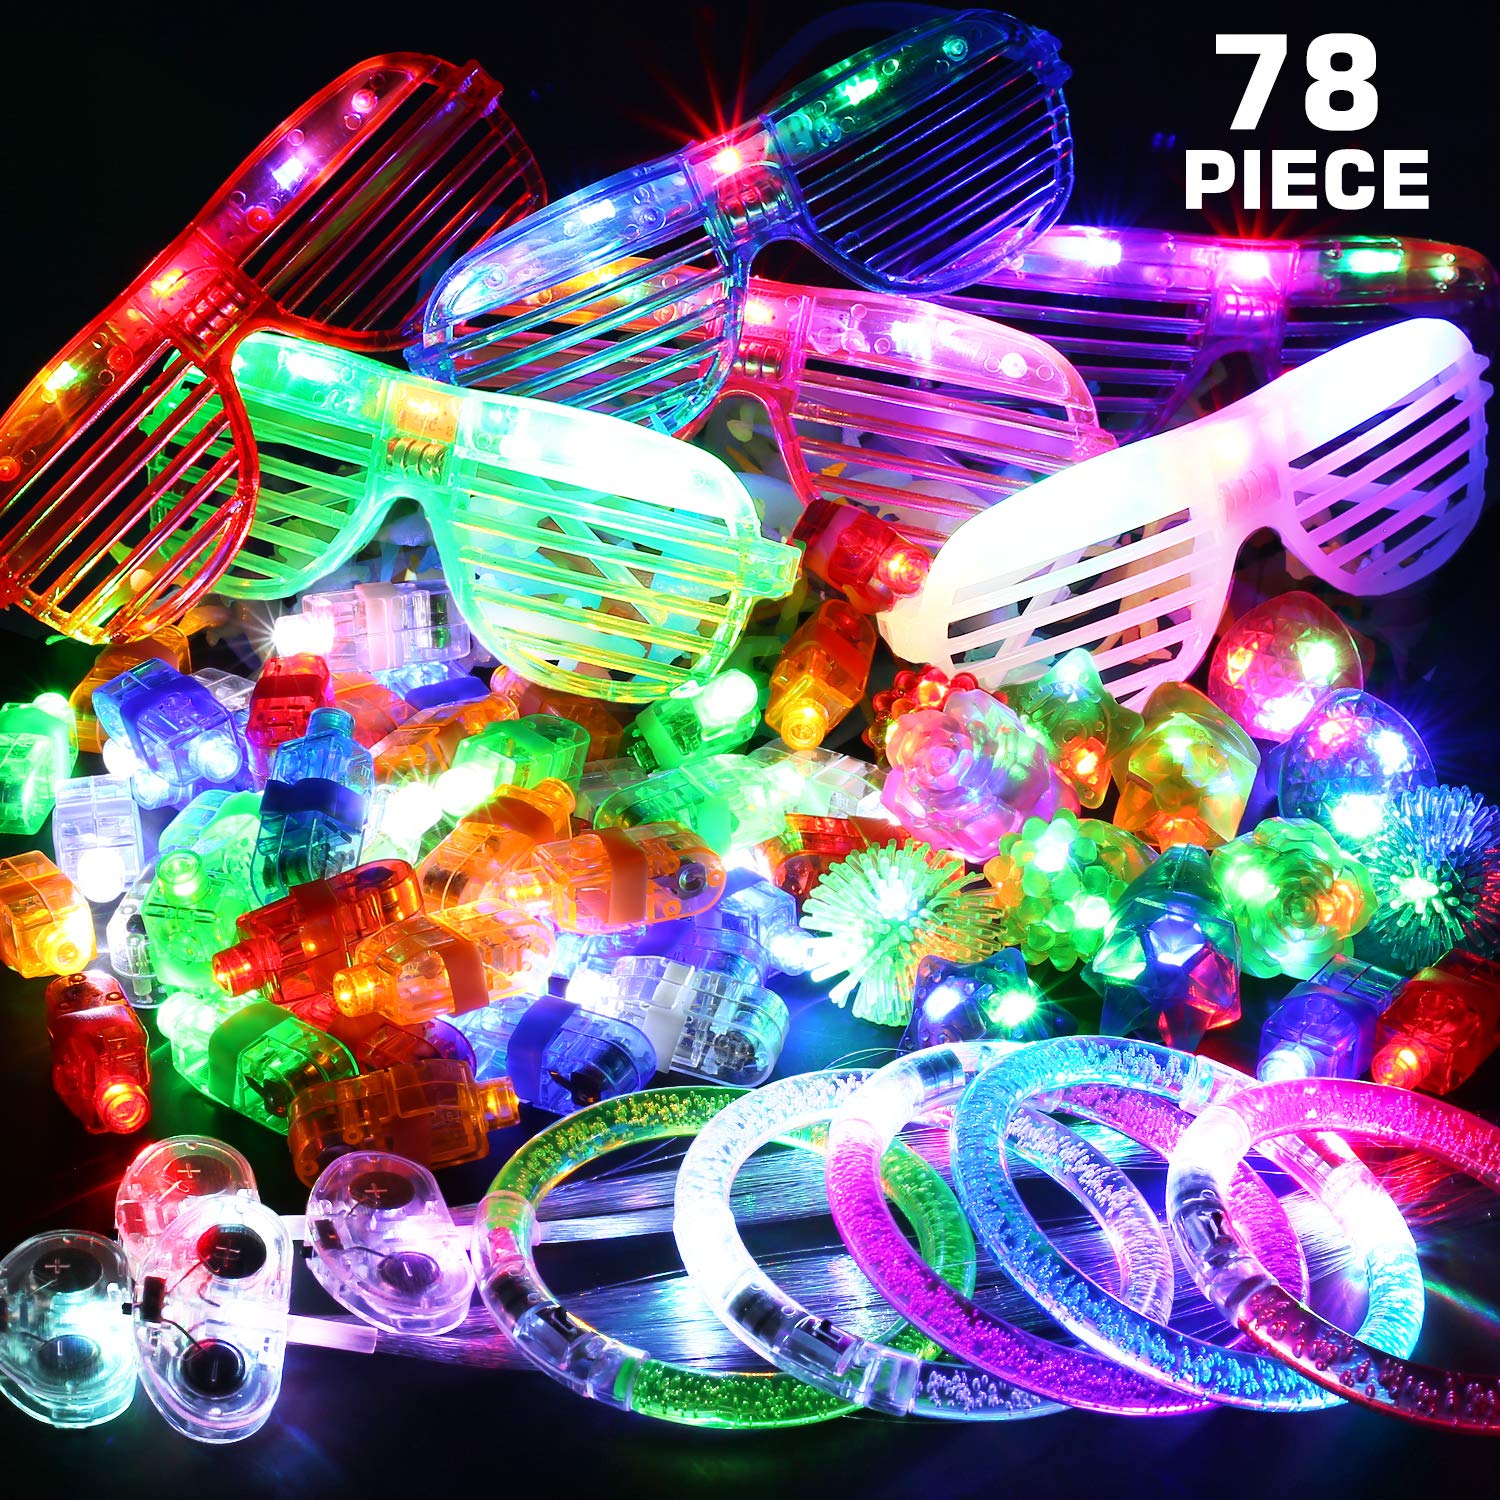 78PCs LED Light Up Toy Party Favors Glow In The Dark,Party Supplies Bulk For Adult Kids Birthday Halloween With 50 Finger Light, 12 Jelly Ring, 6 Flashing Glasses, 5 Bracelet, 5 Fiber Optic Hair Light